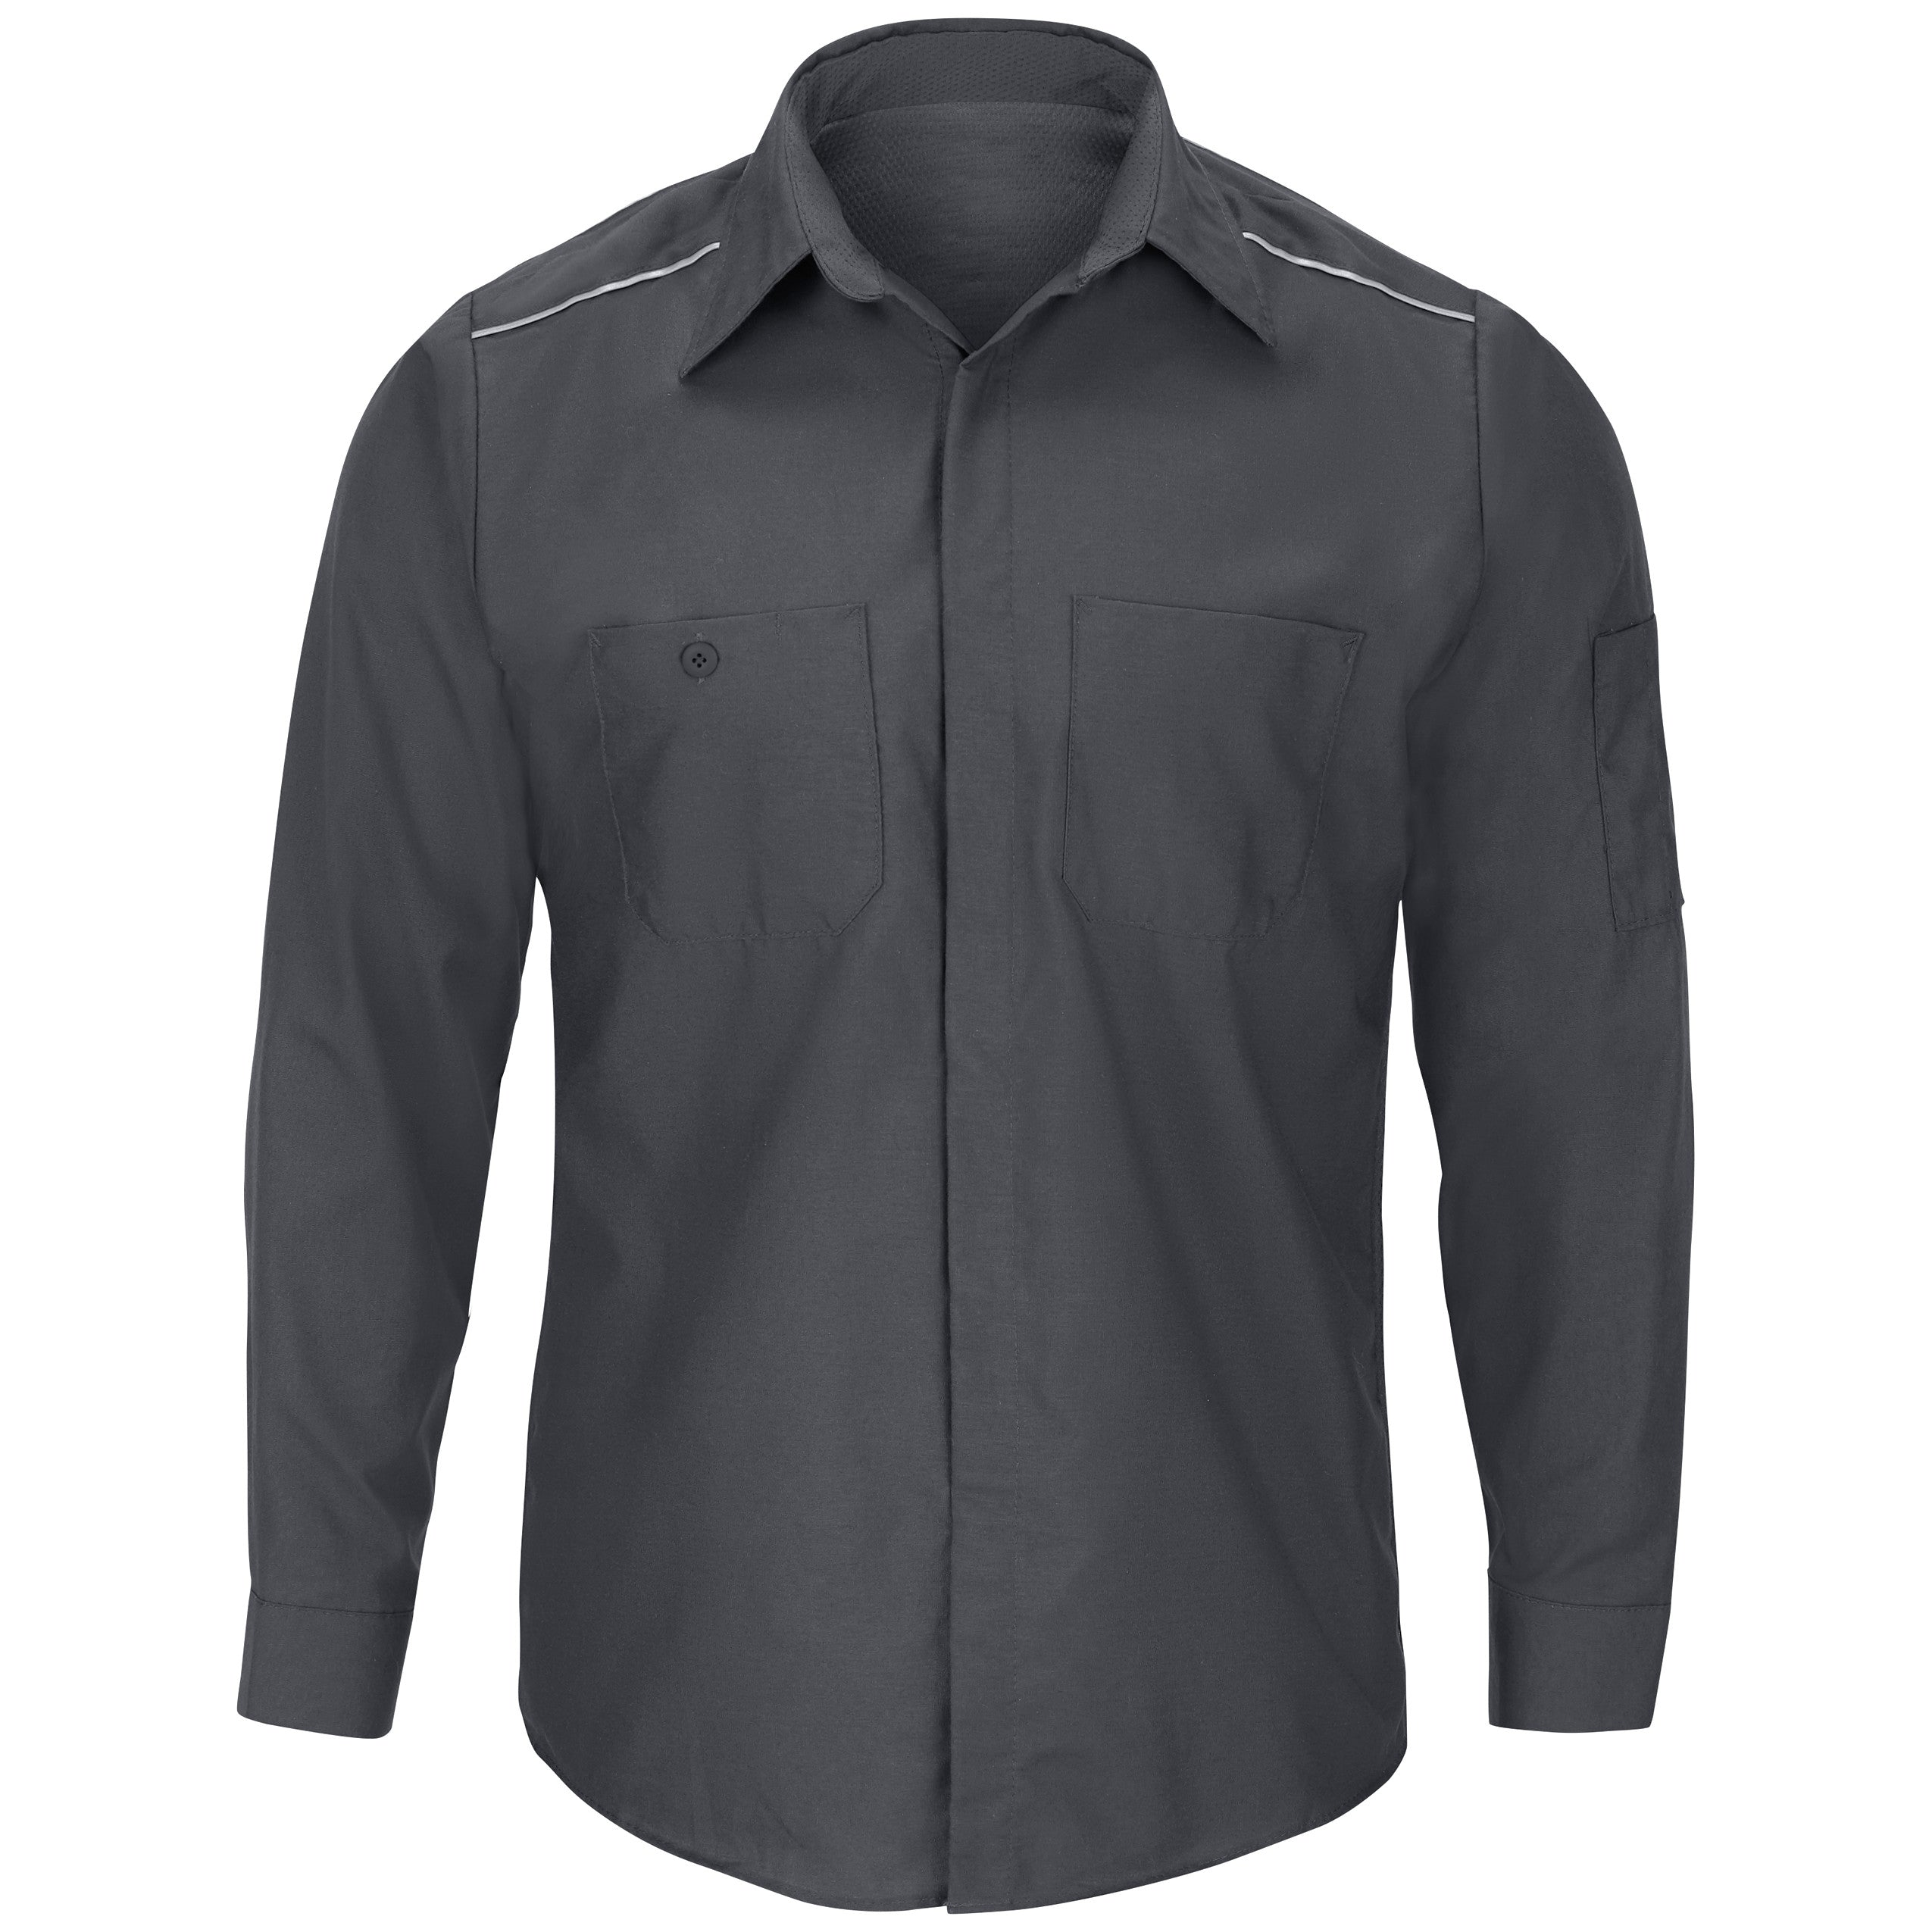 Men's Long Sleeve Pro Airflow Work Shirt SP3A - Charcoal-eSafety Supplies, Inc